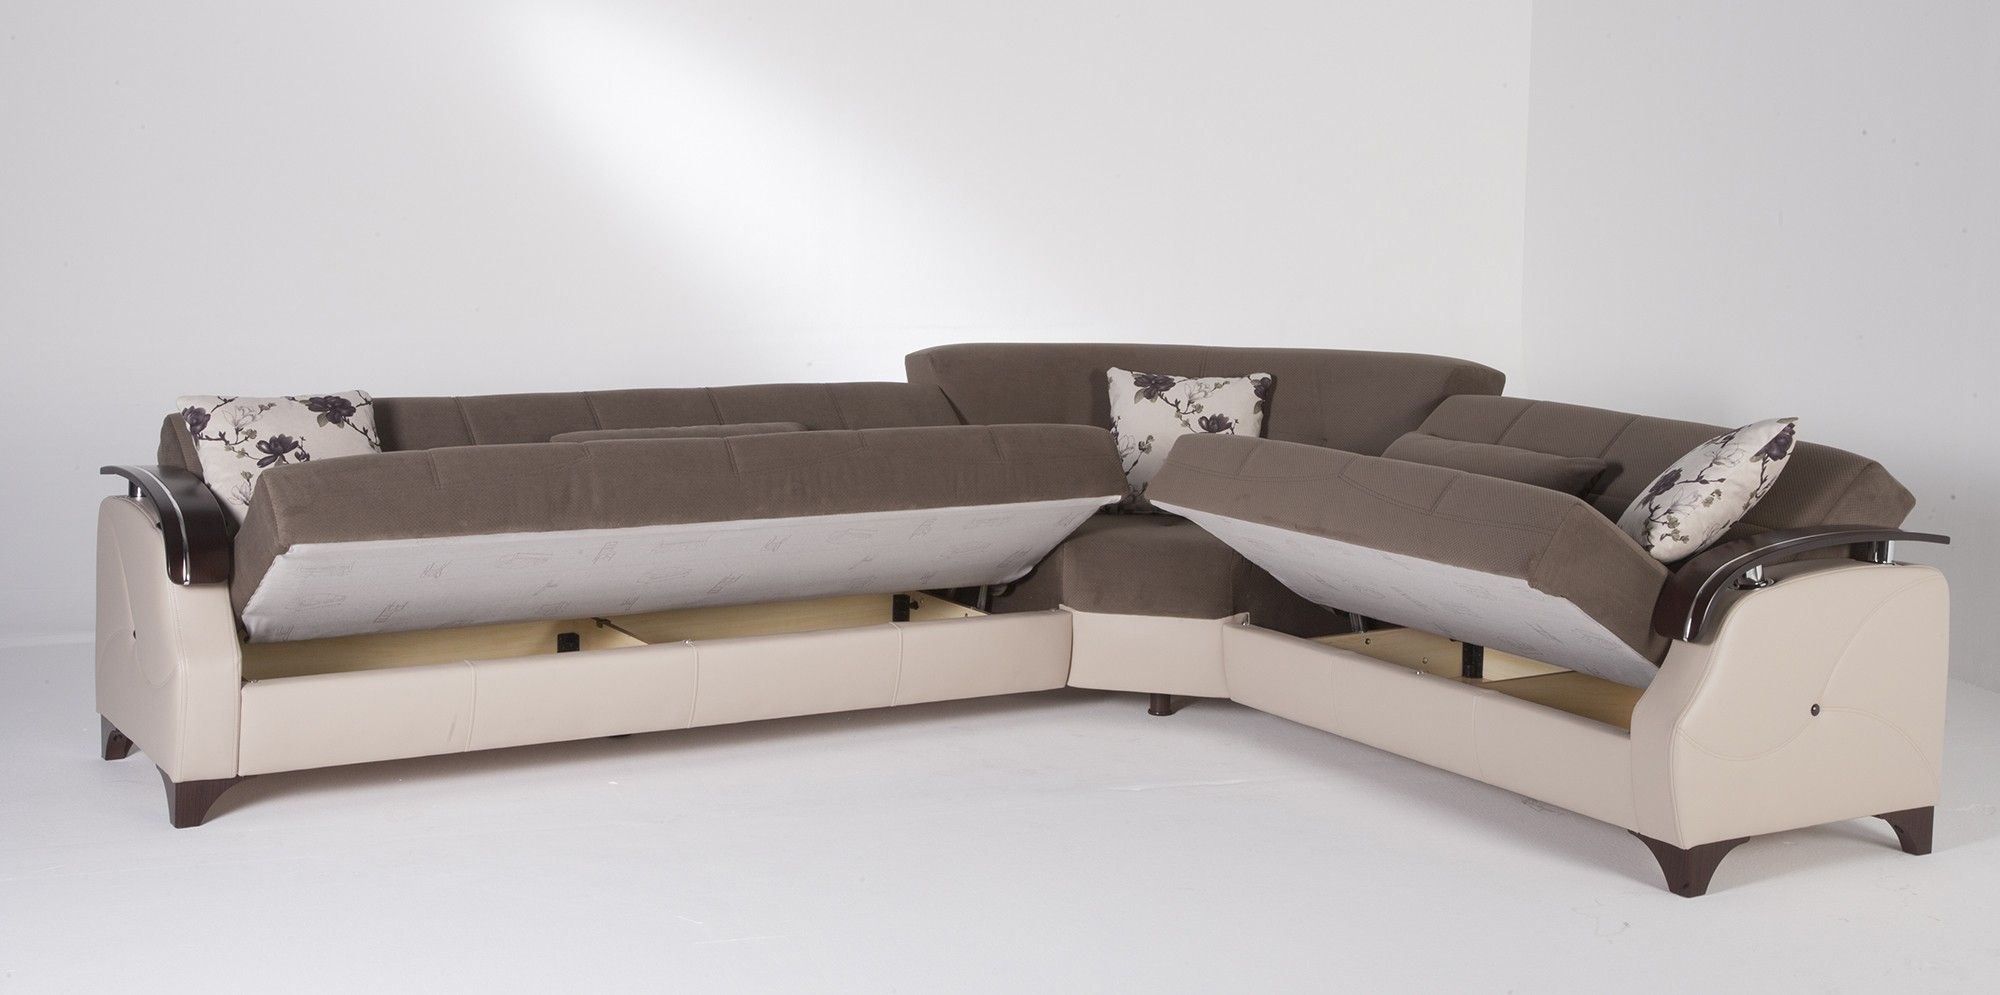 Sectional Sofa Design: Cheap Sectional Sofas Furniture Design Stock Intended For L Shaped Sectional Sleeper Sofas (View 8 of 10)